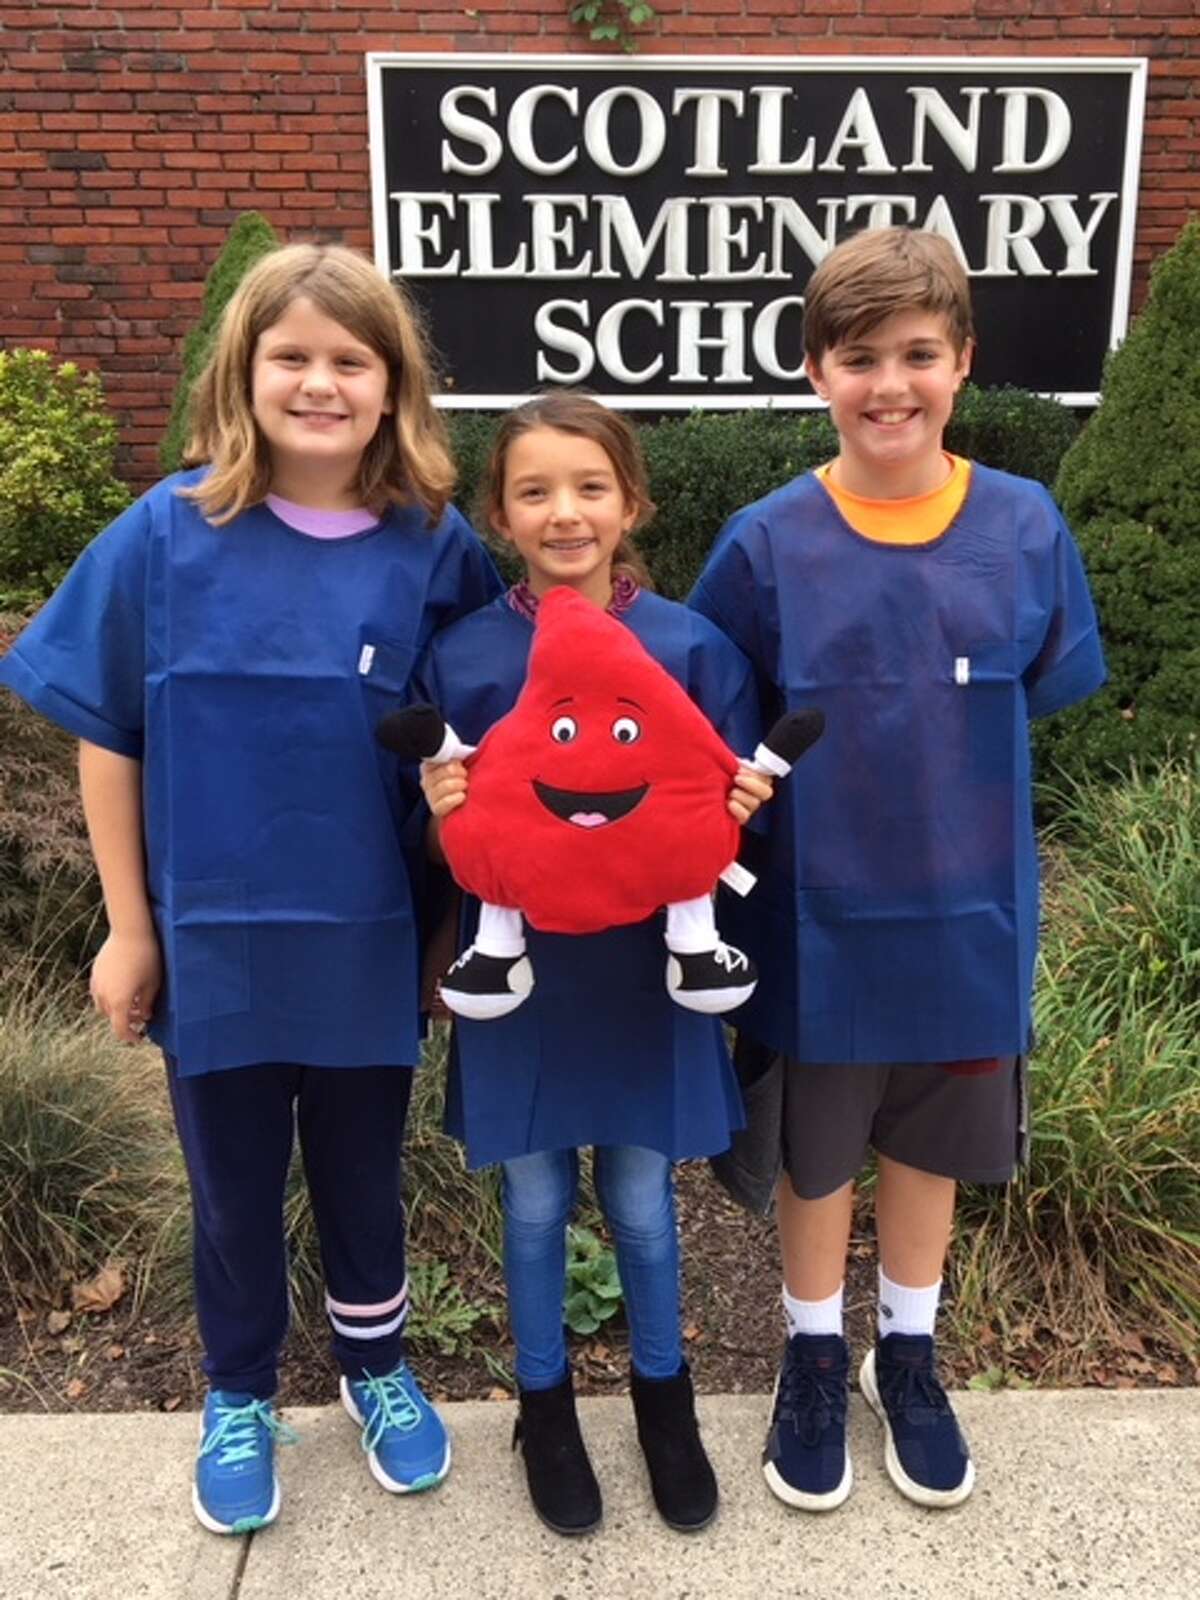 Scotland Elementary School fifth graders, from left to right, Grace Gordon, Juliette Arencibia, Daniel Petersen will be hosting the schools sixth annual blood drive Thursday, Oct. 25.